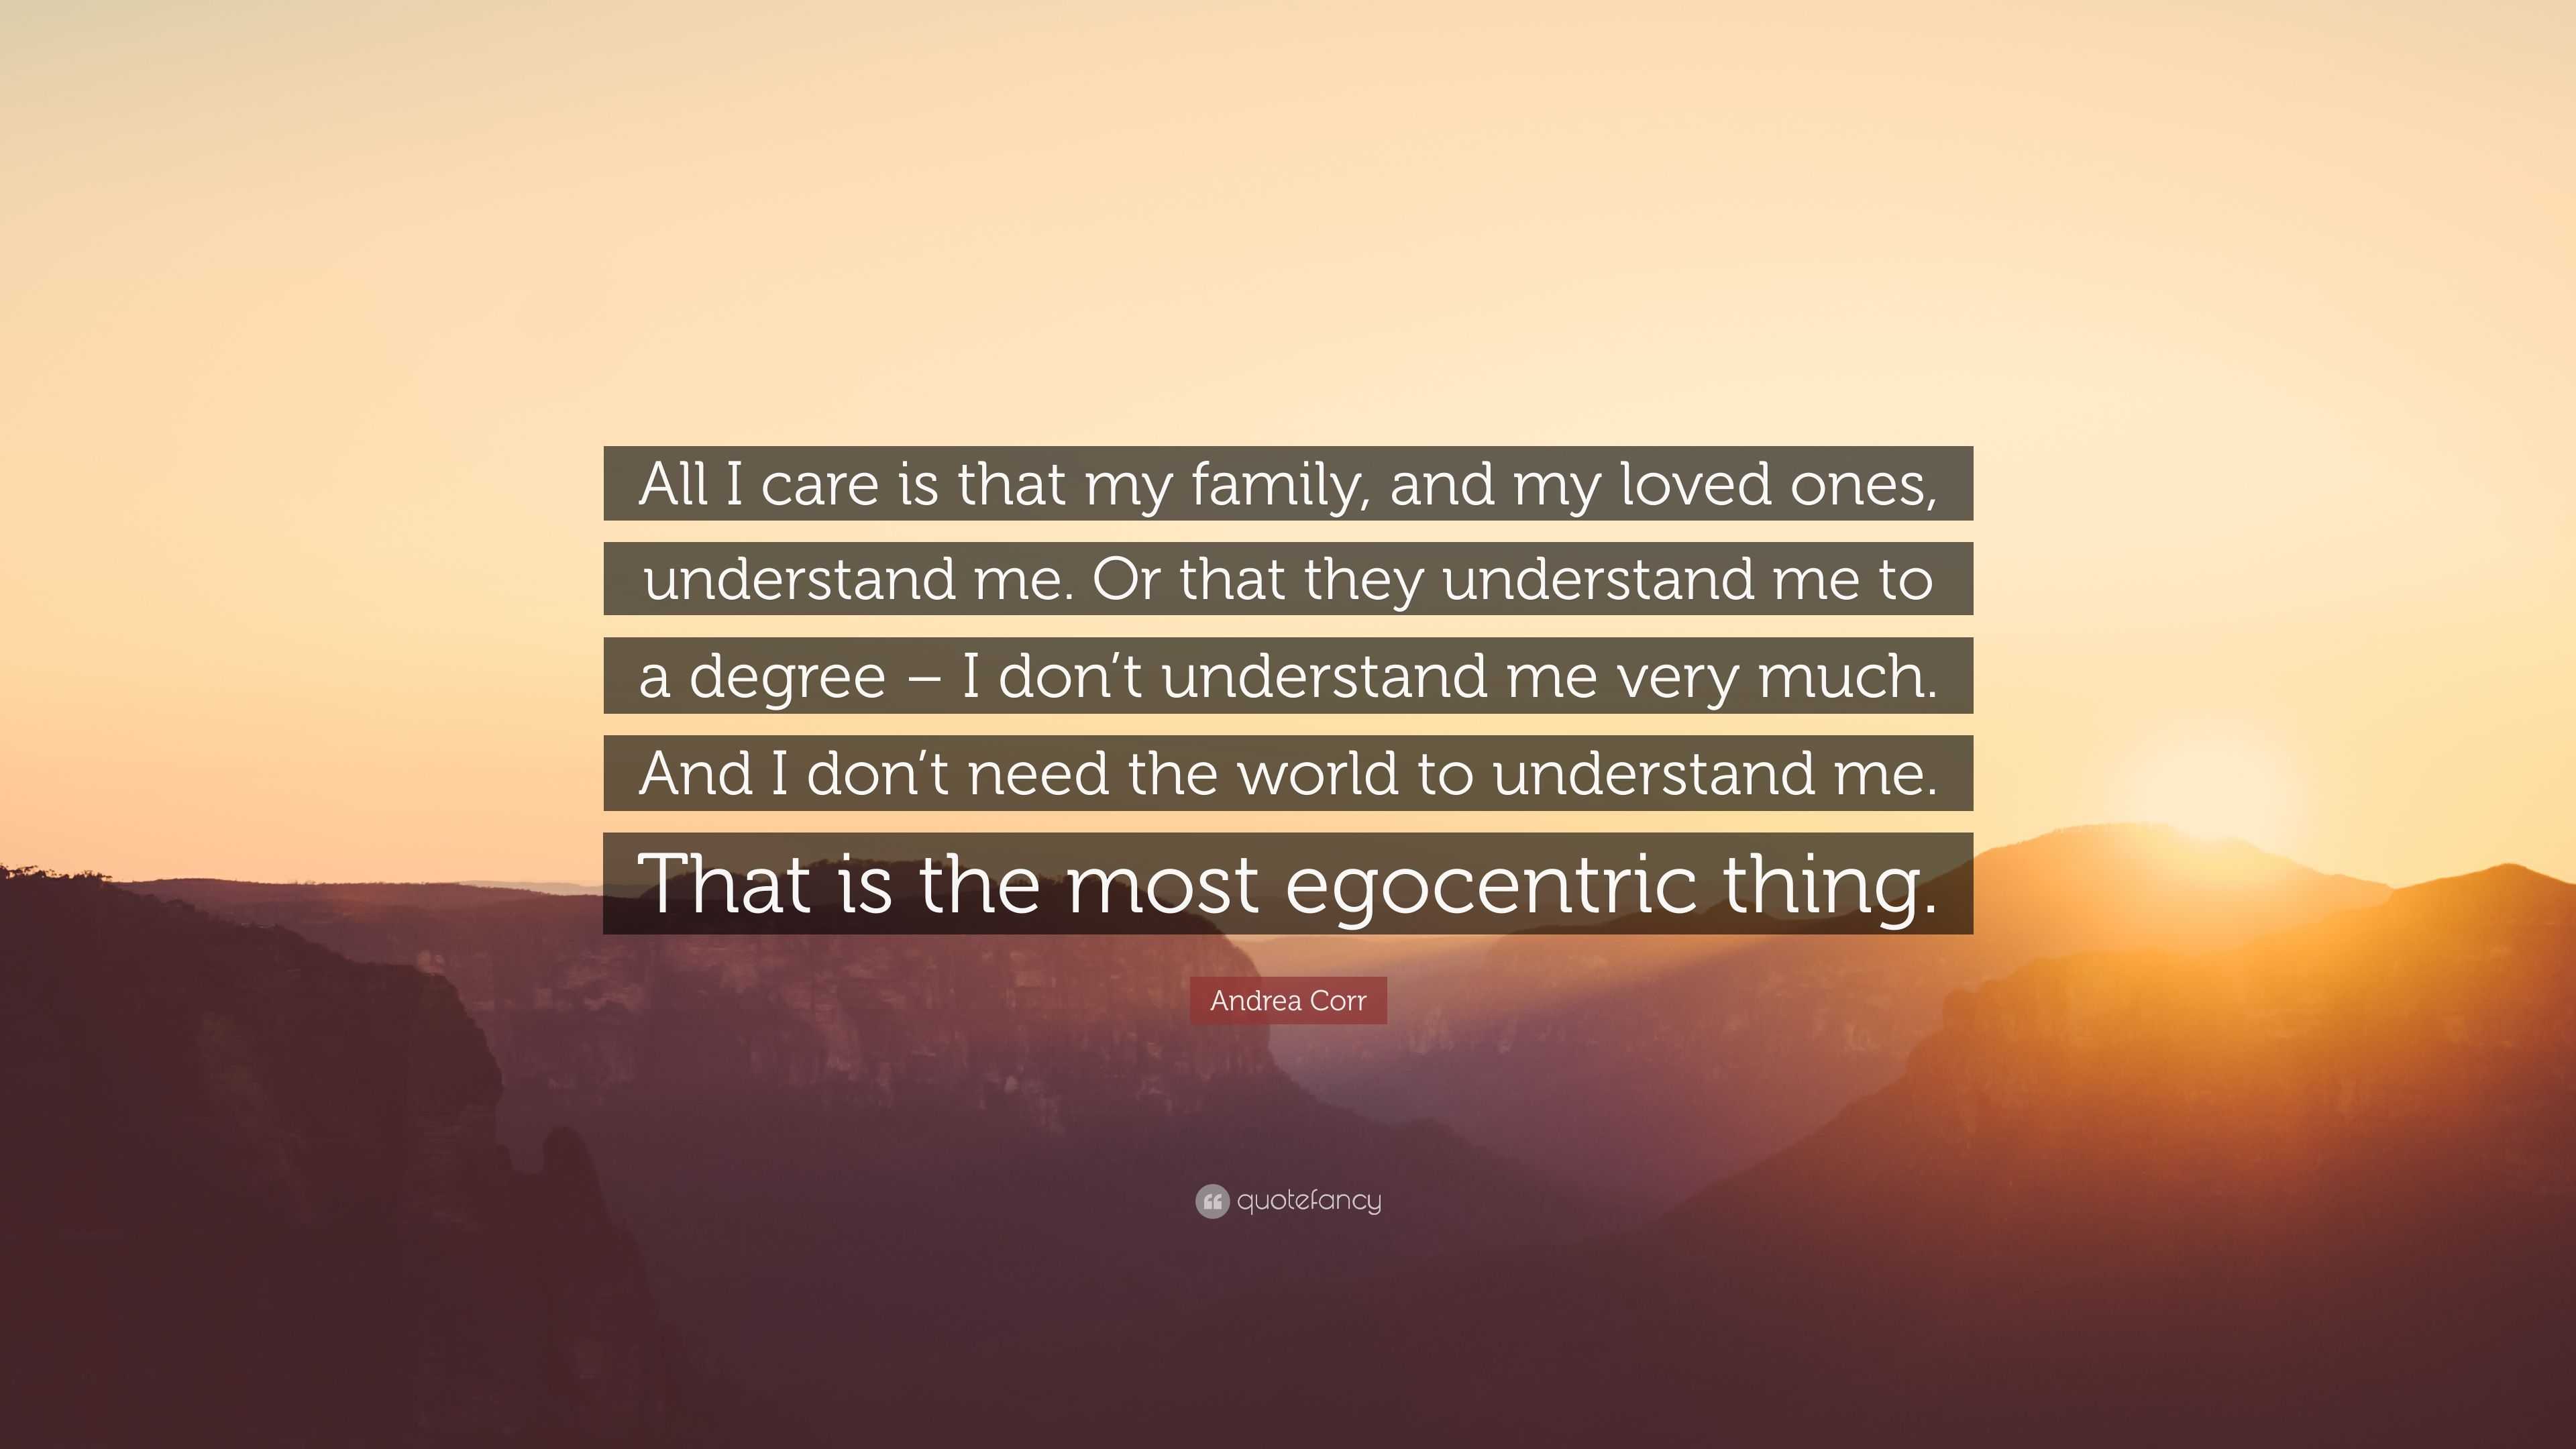 Andrea Corr Quote “All I care is that my family and my loved